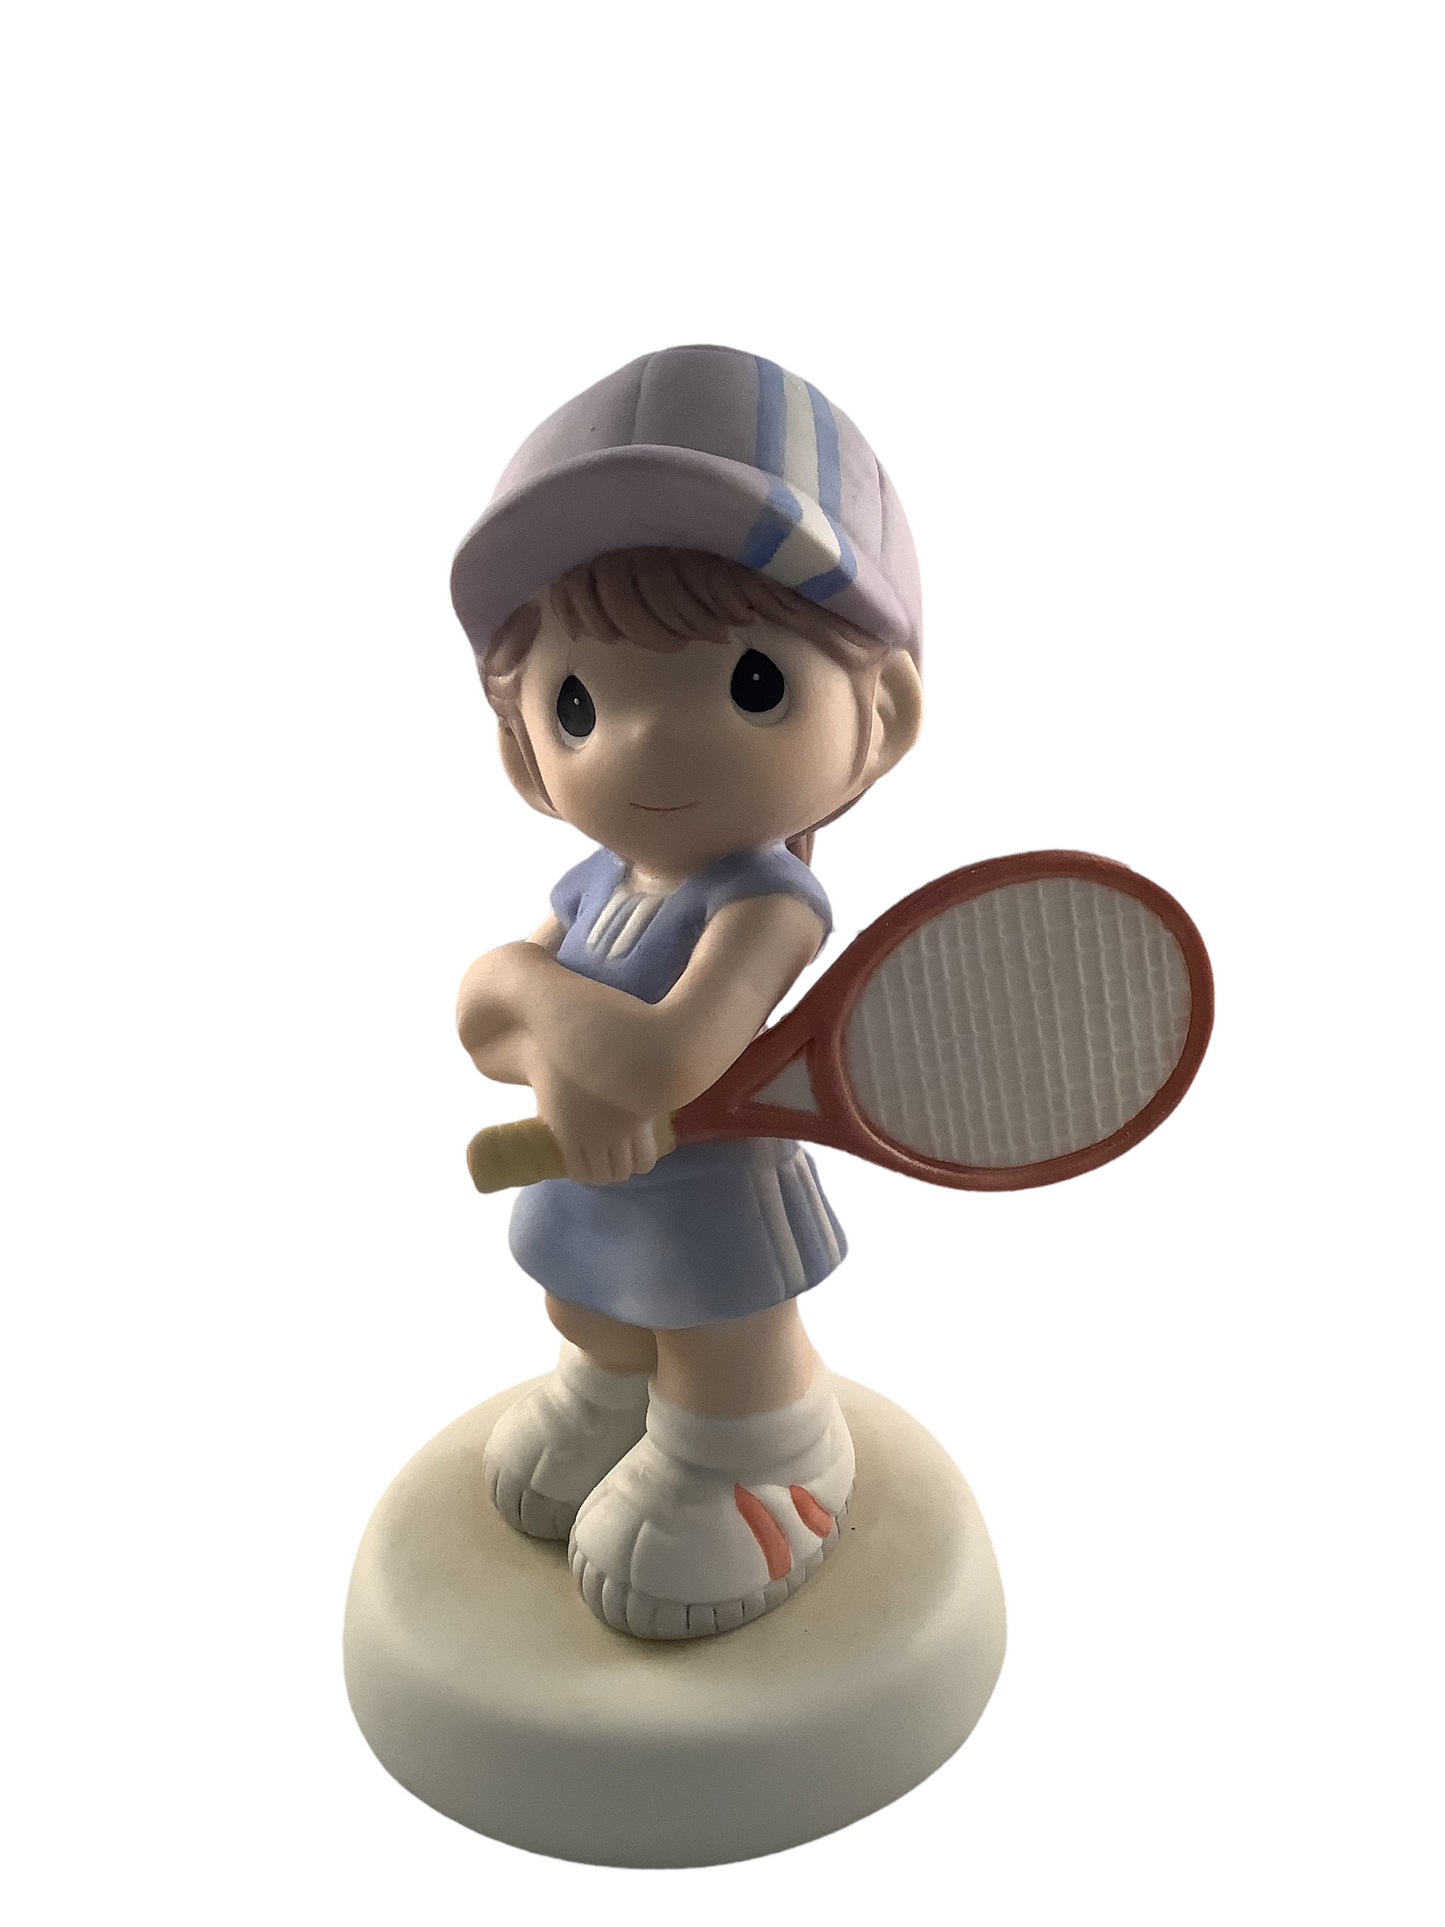 You're An Ace On Any Court - Precious Moment Figurine